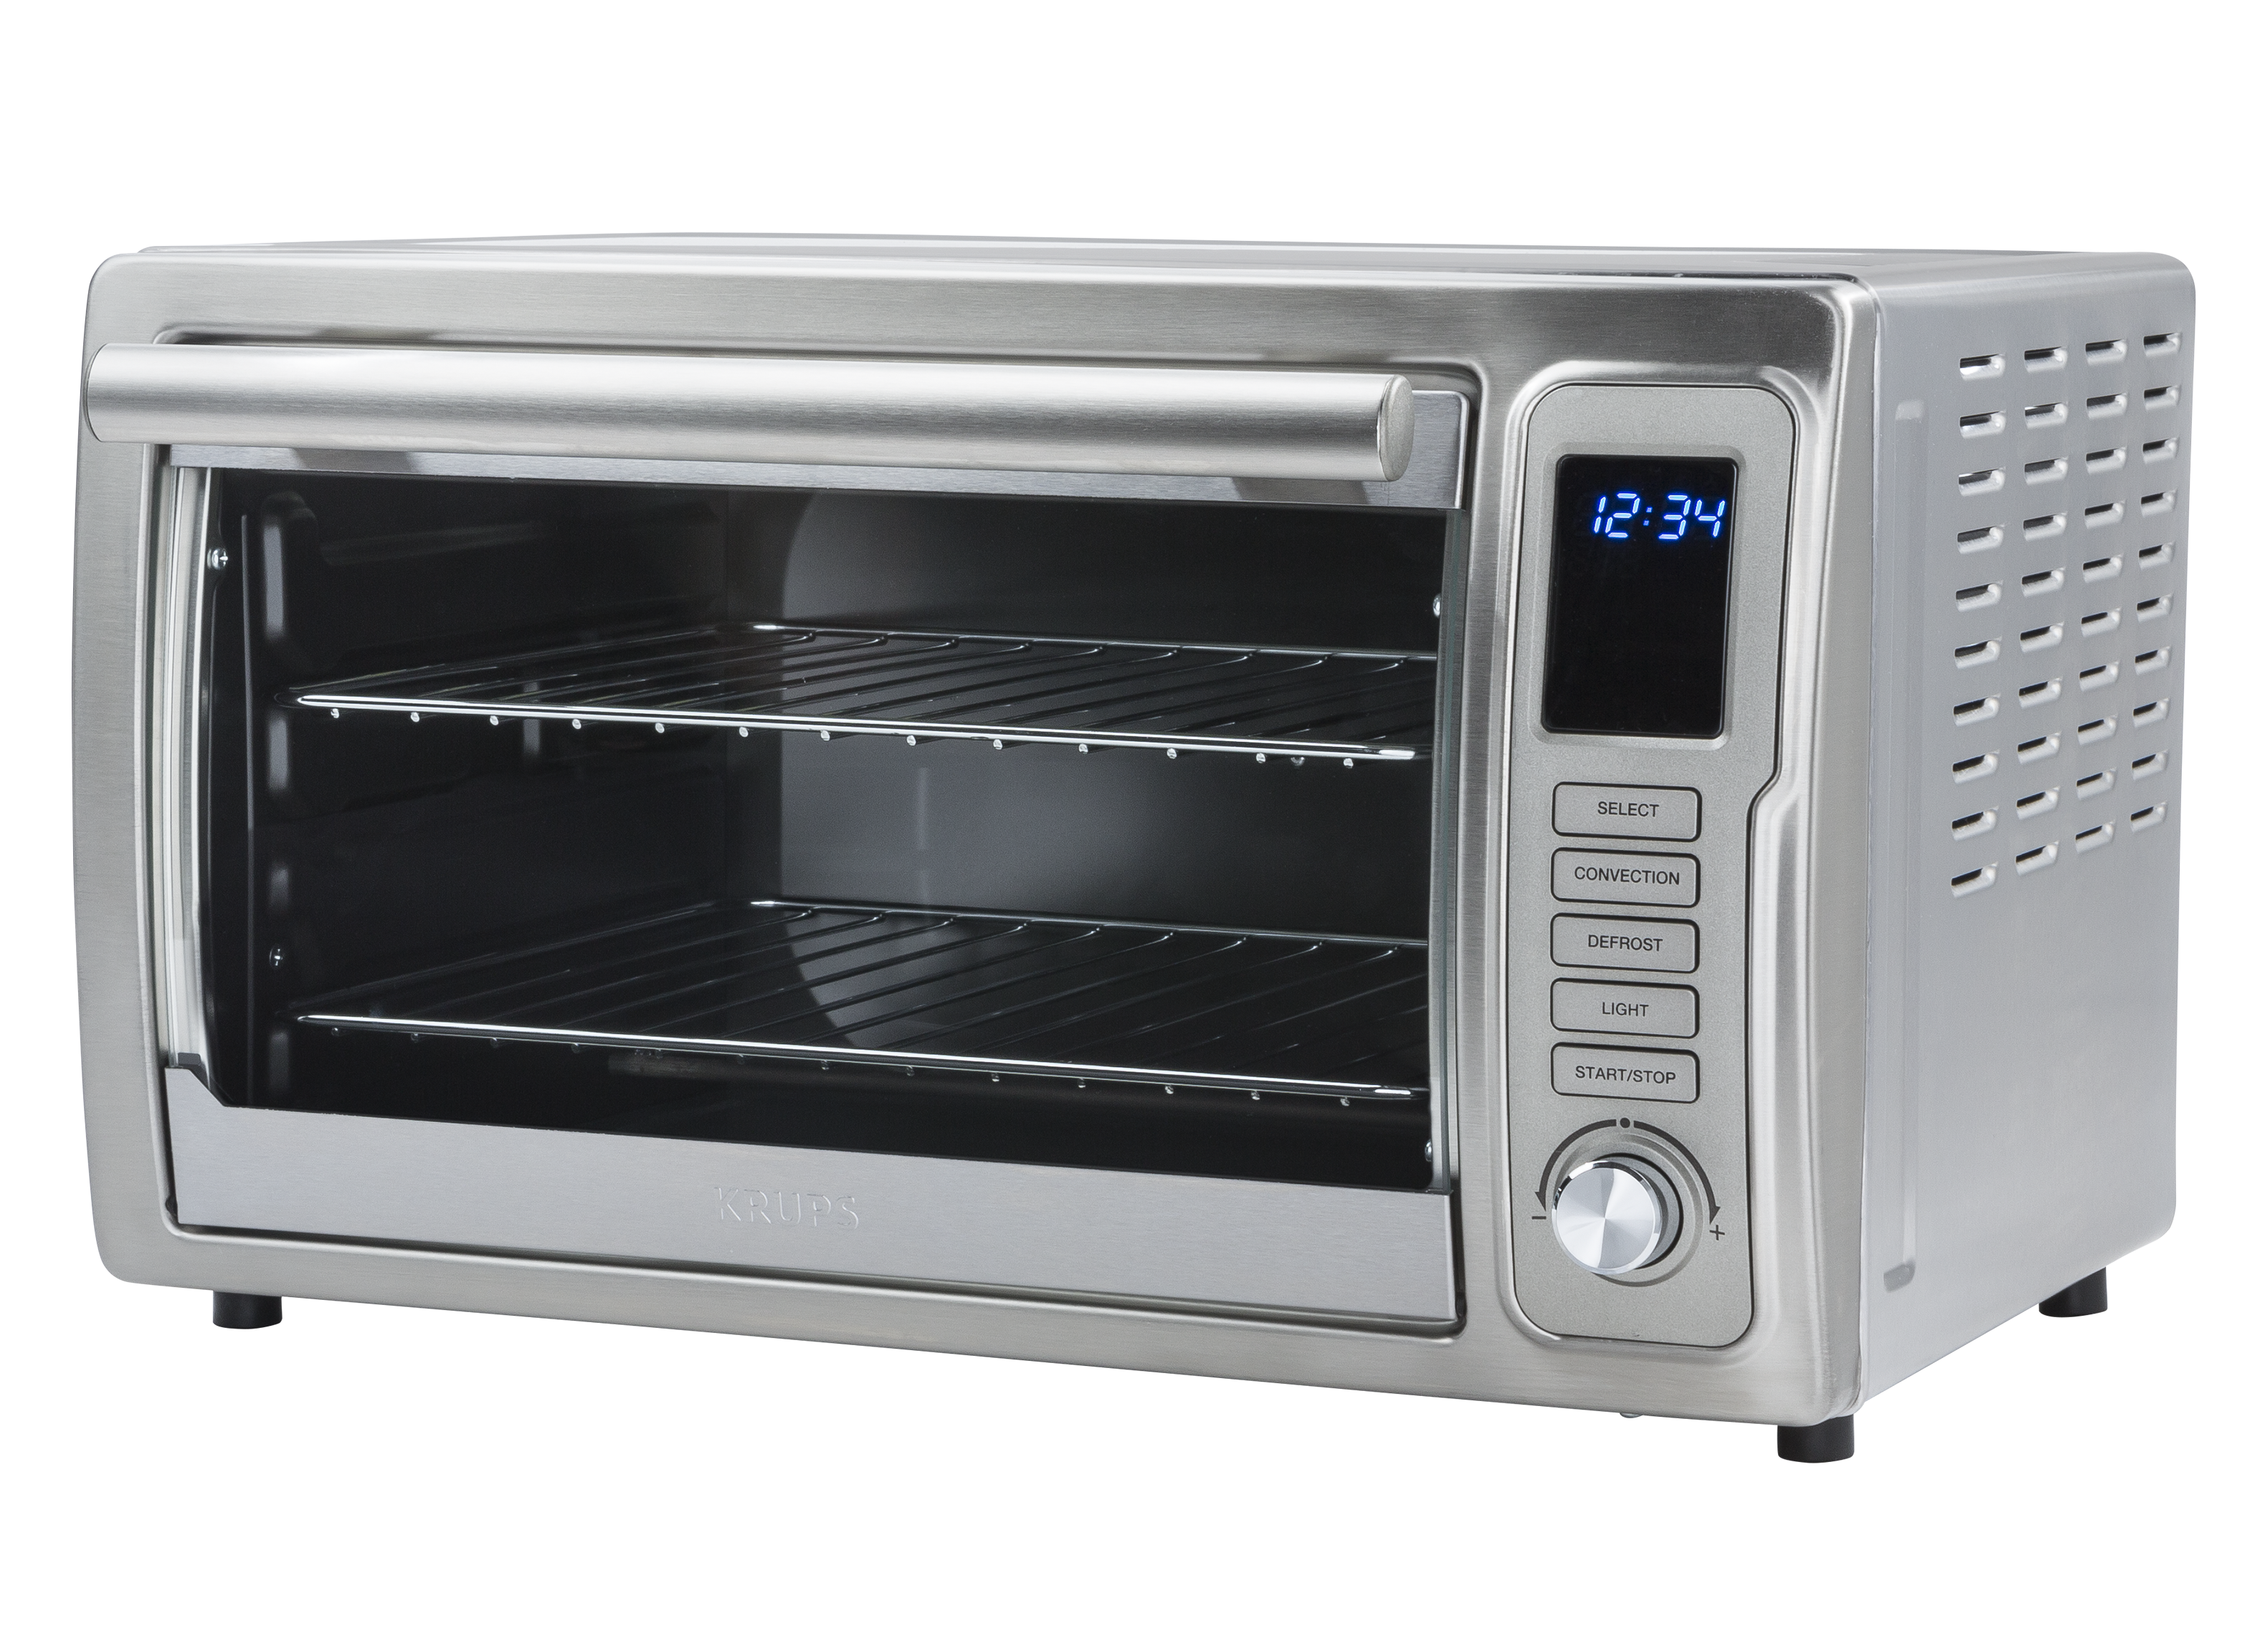 https://crdms.images.consumerreports.org/prod/products/cr/models/389604-toasterovens-krups-deluxeconvectionok710d51.png